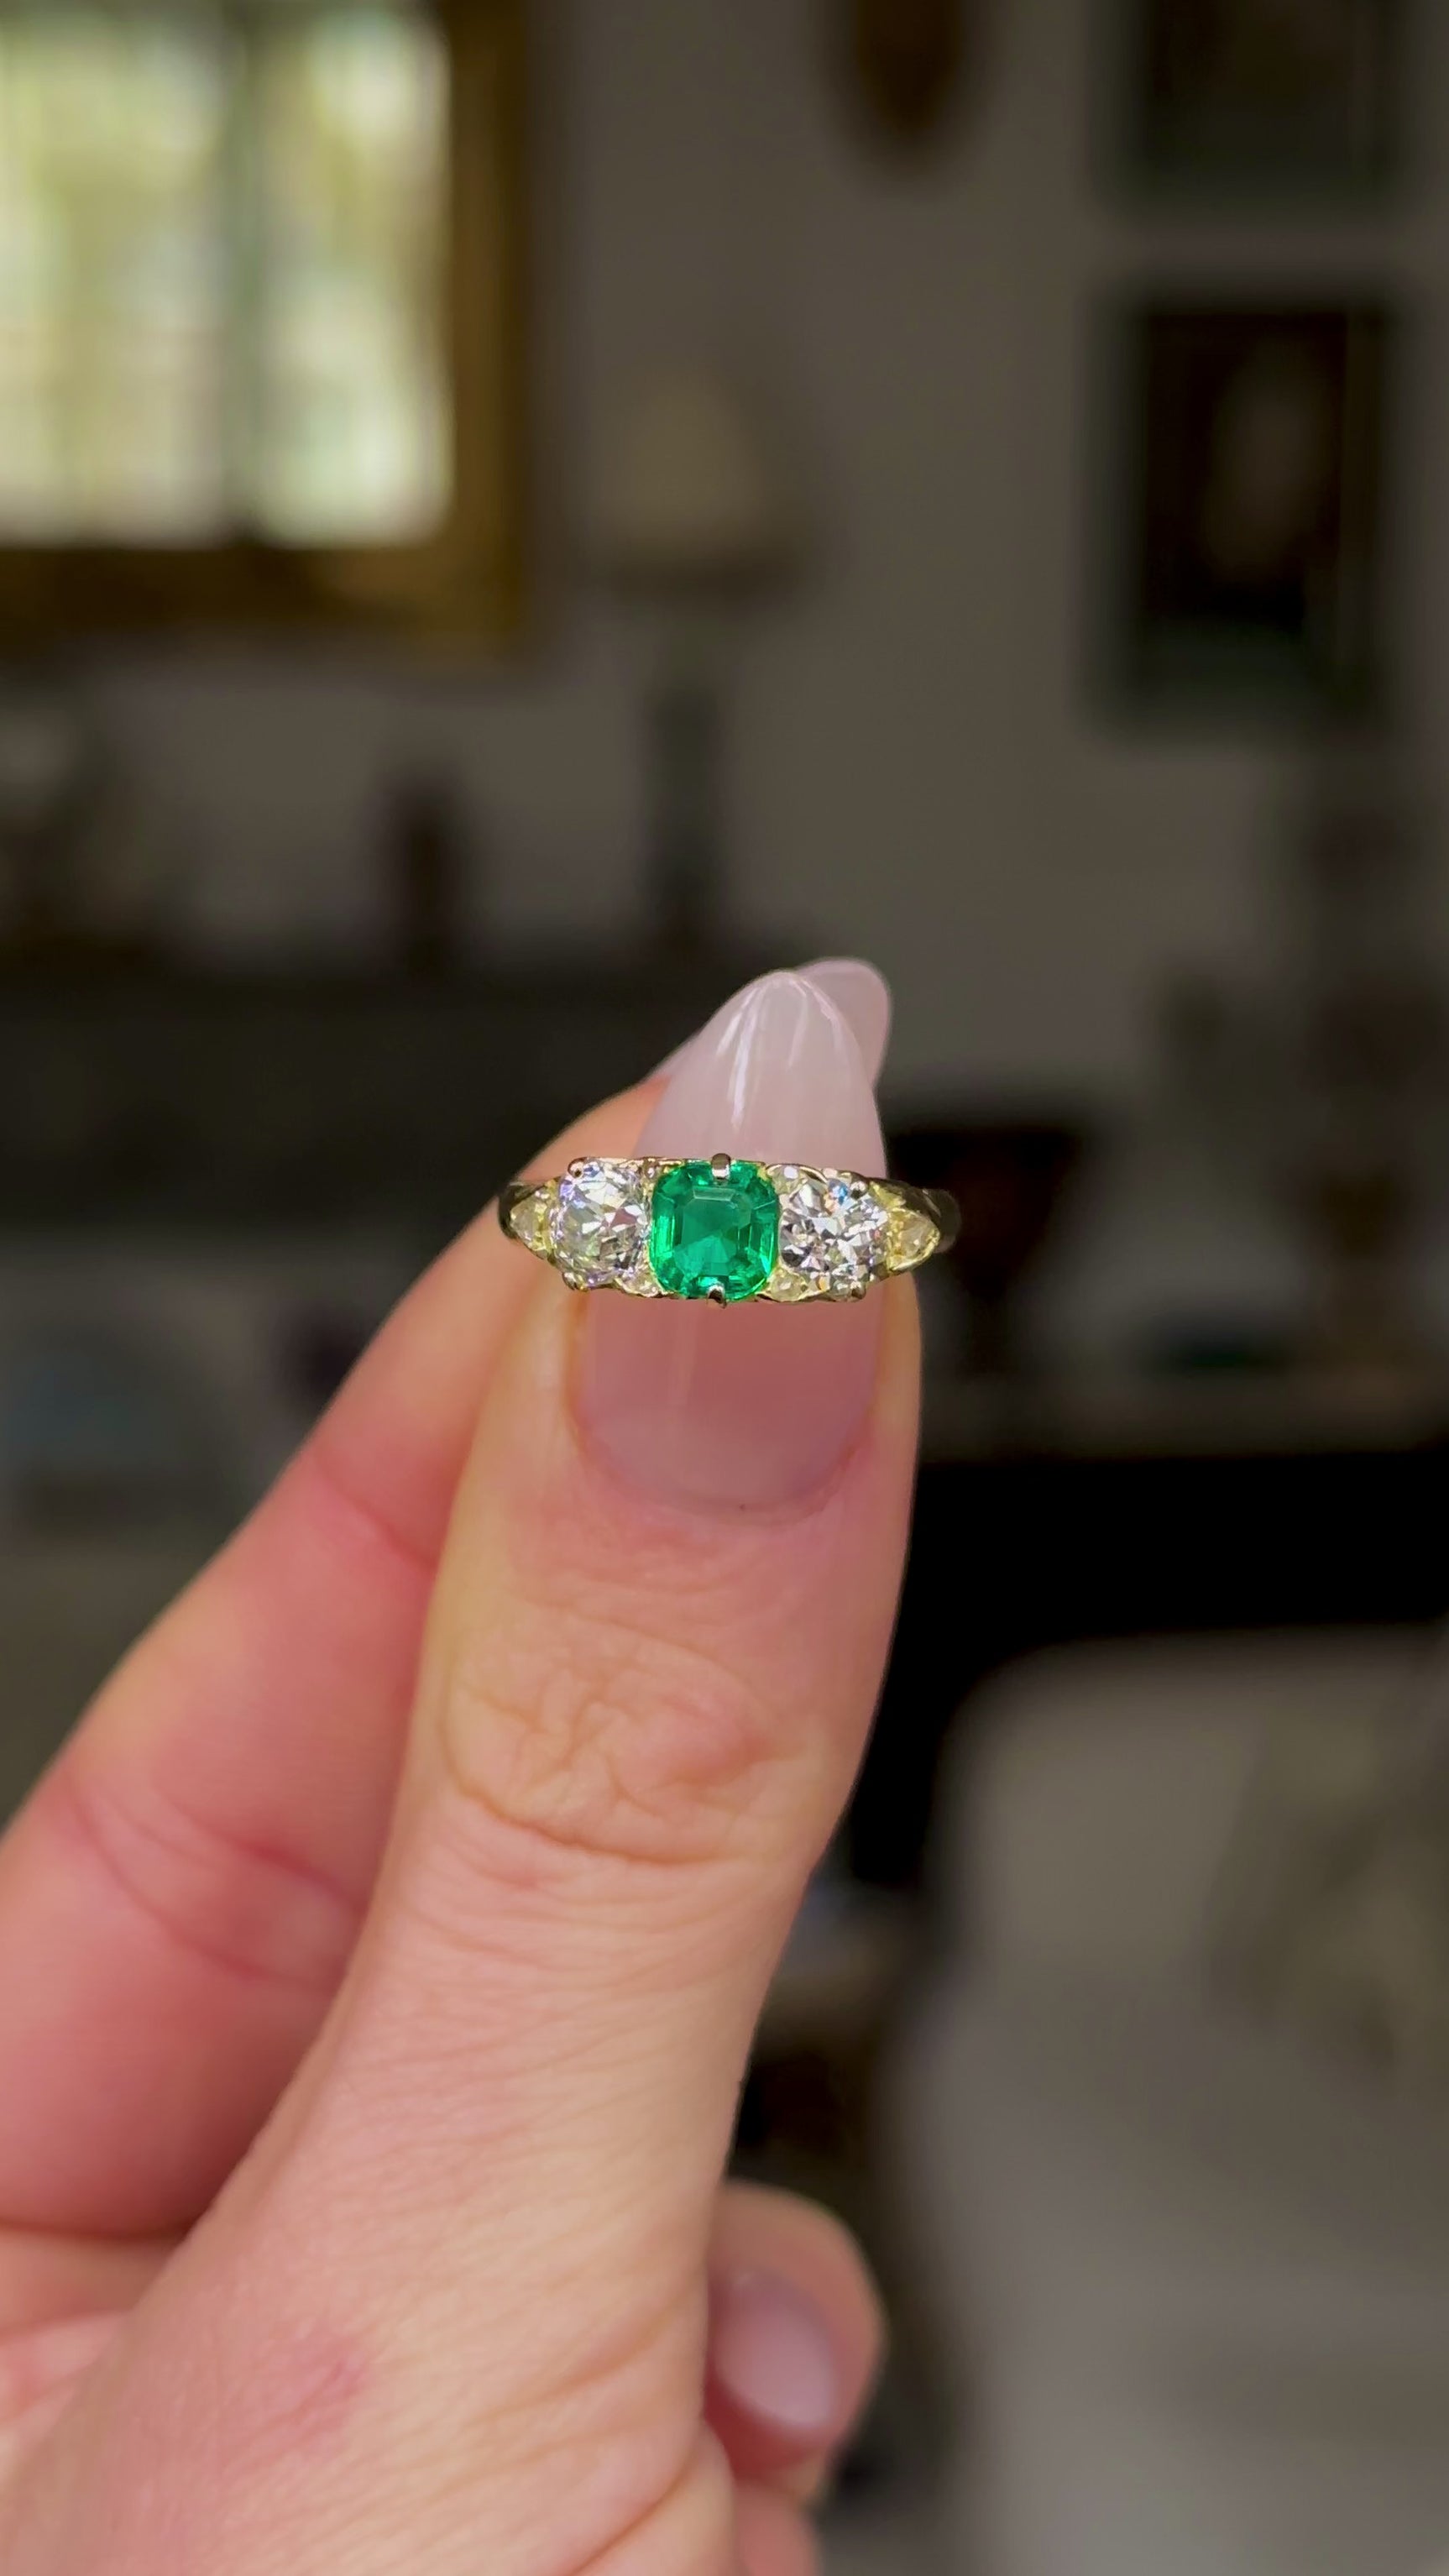 Antique, Edwardian Emerald and Diamond Three Stone Ring, 18ct Yellow Gold held in fingers and rotated to give perspective.